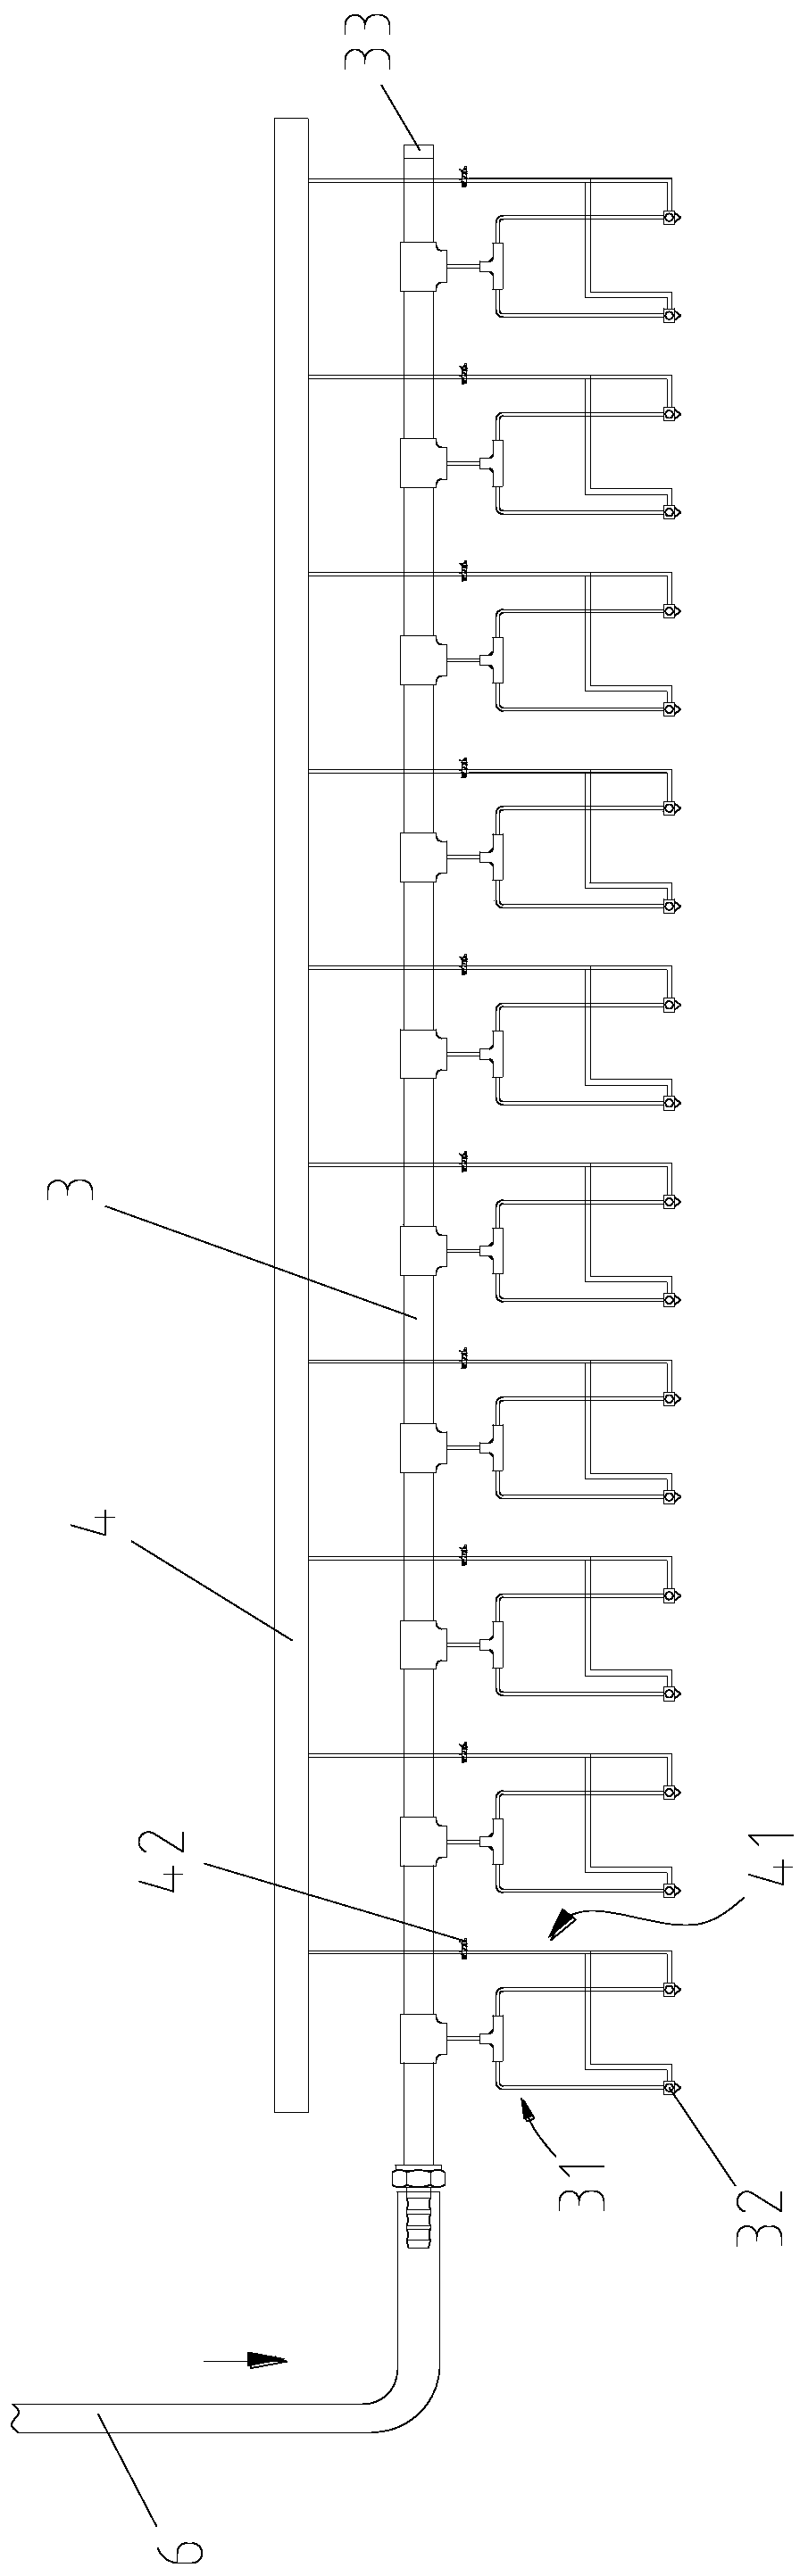 Automatic wax spraying system and method